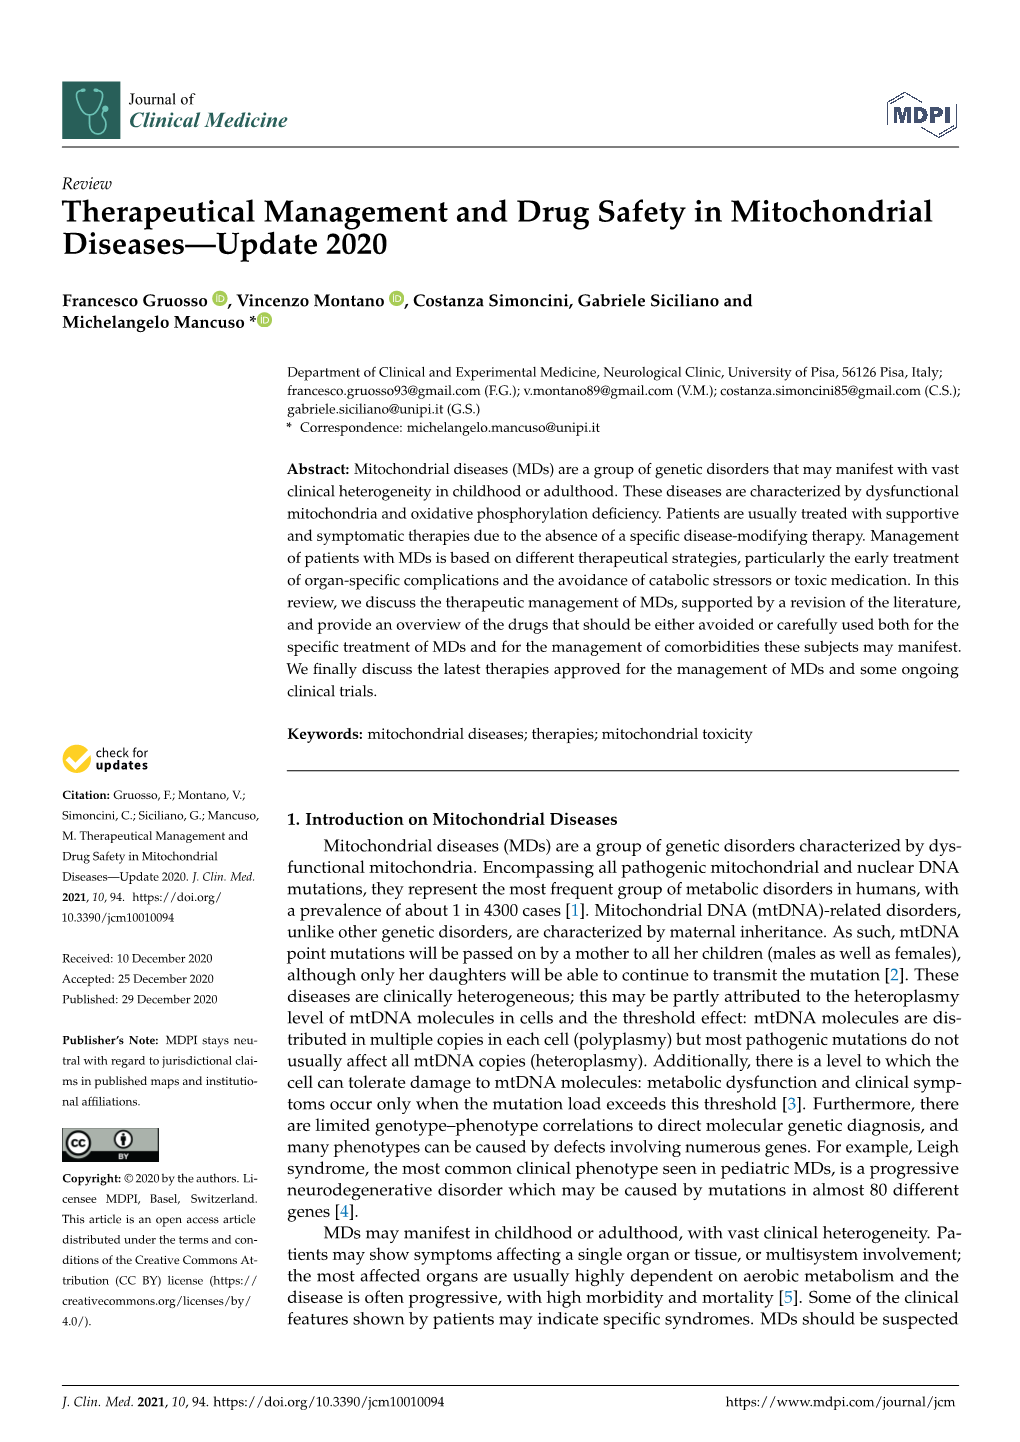 Therapeutical Management and Drug Safety in Mitochondrial Diseases—Update 2020